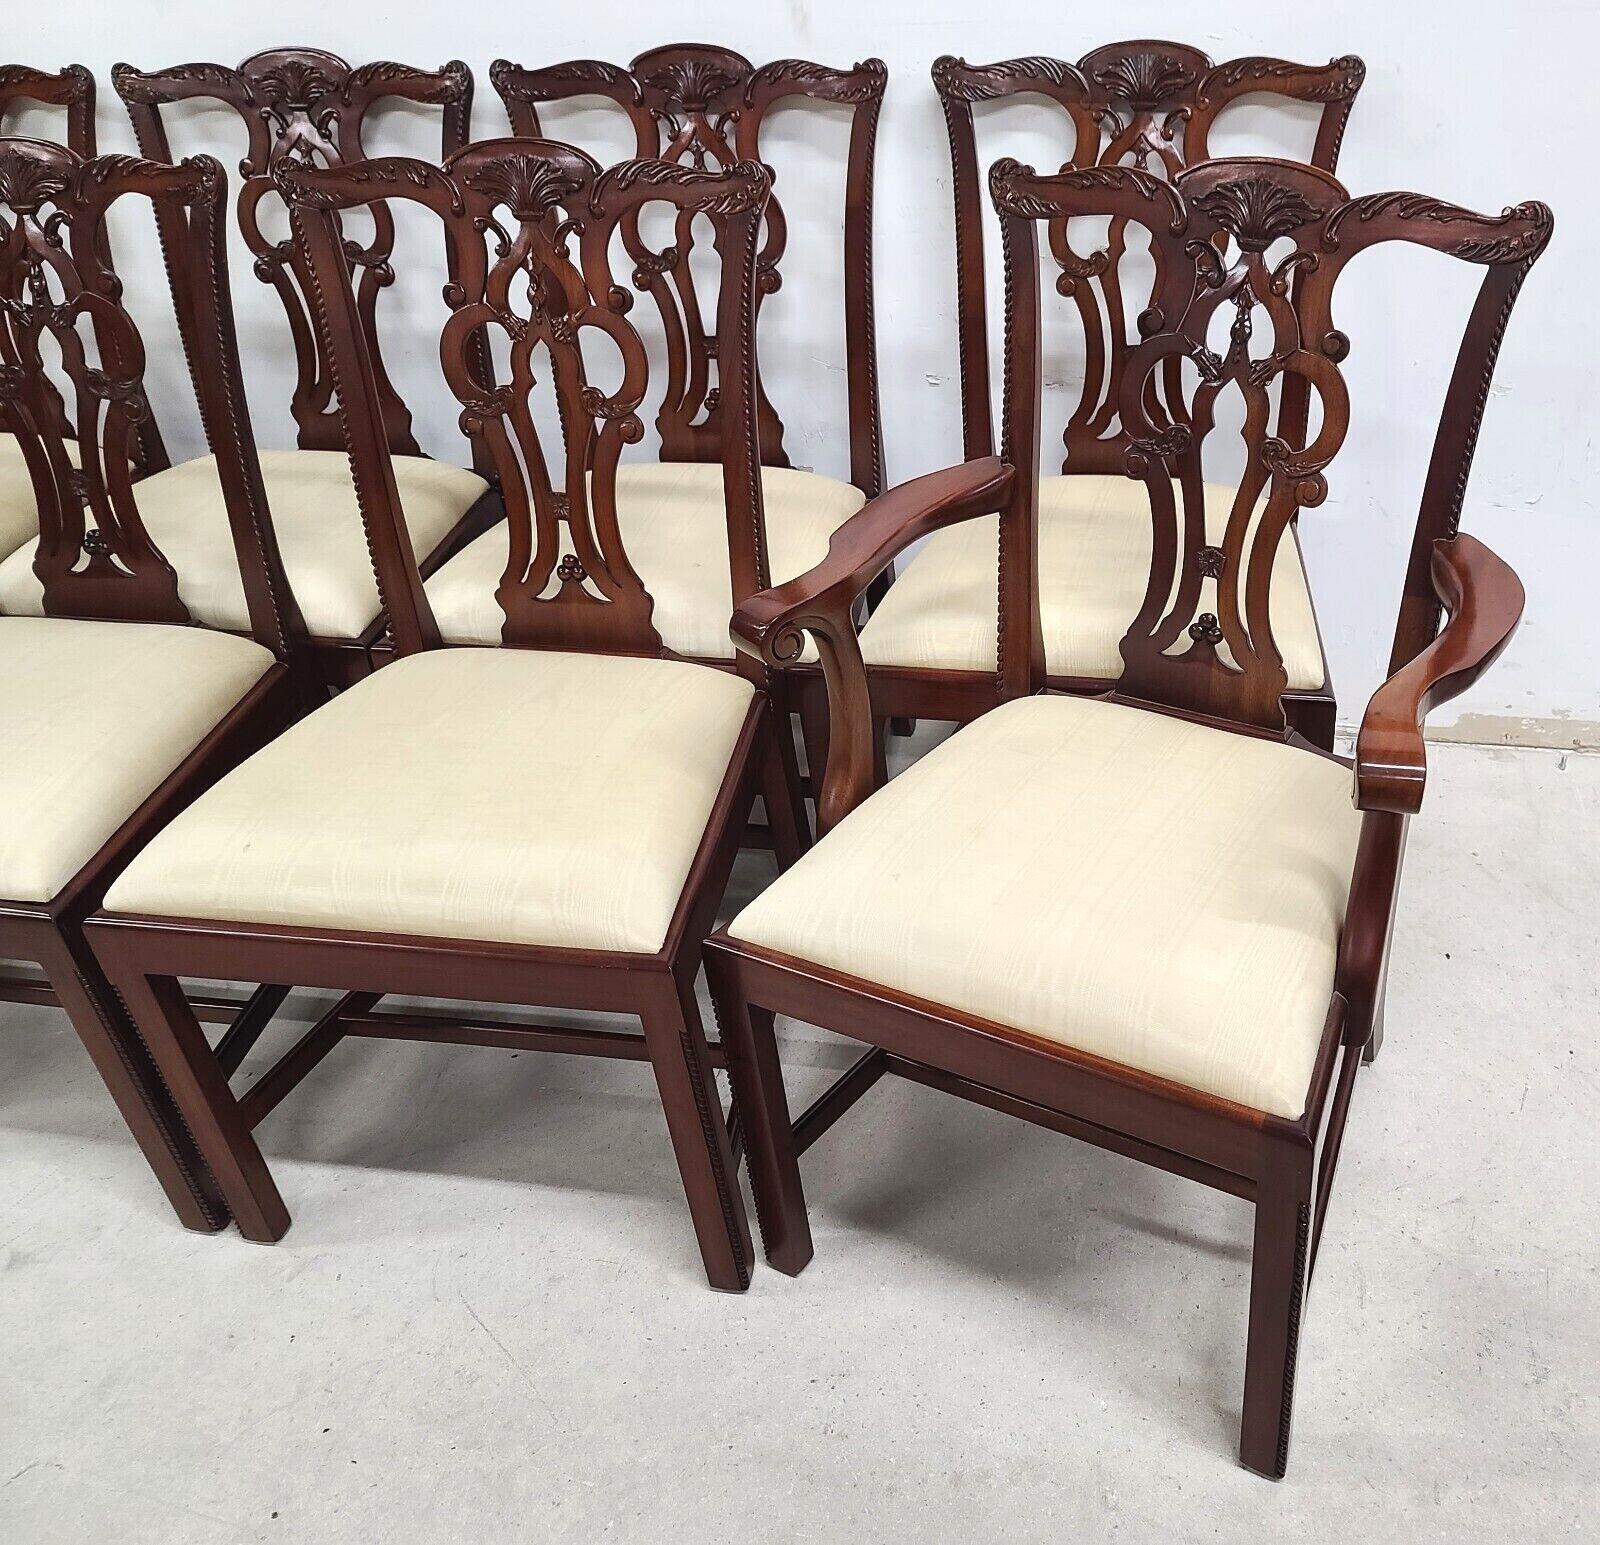 Offering one of our recent palm beach estate fine furniture acquisitions of a
Set of 8 Mahogany Chippendale dining chairs by Maitland Smith
Set includes 2 arm and 6 side chairs

Approximate measurements in inches
Armchairs:
38.75